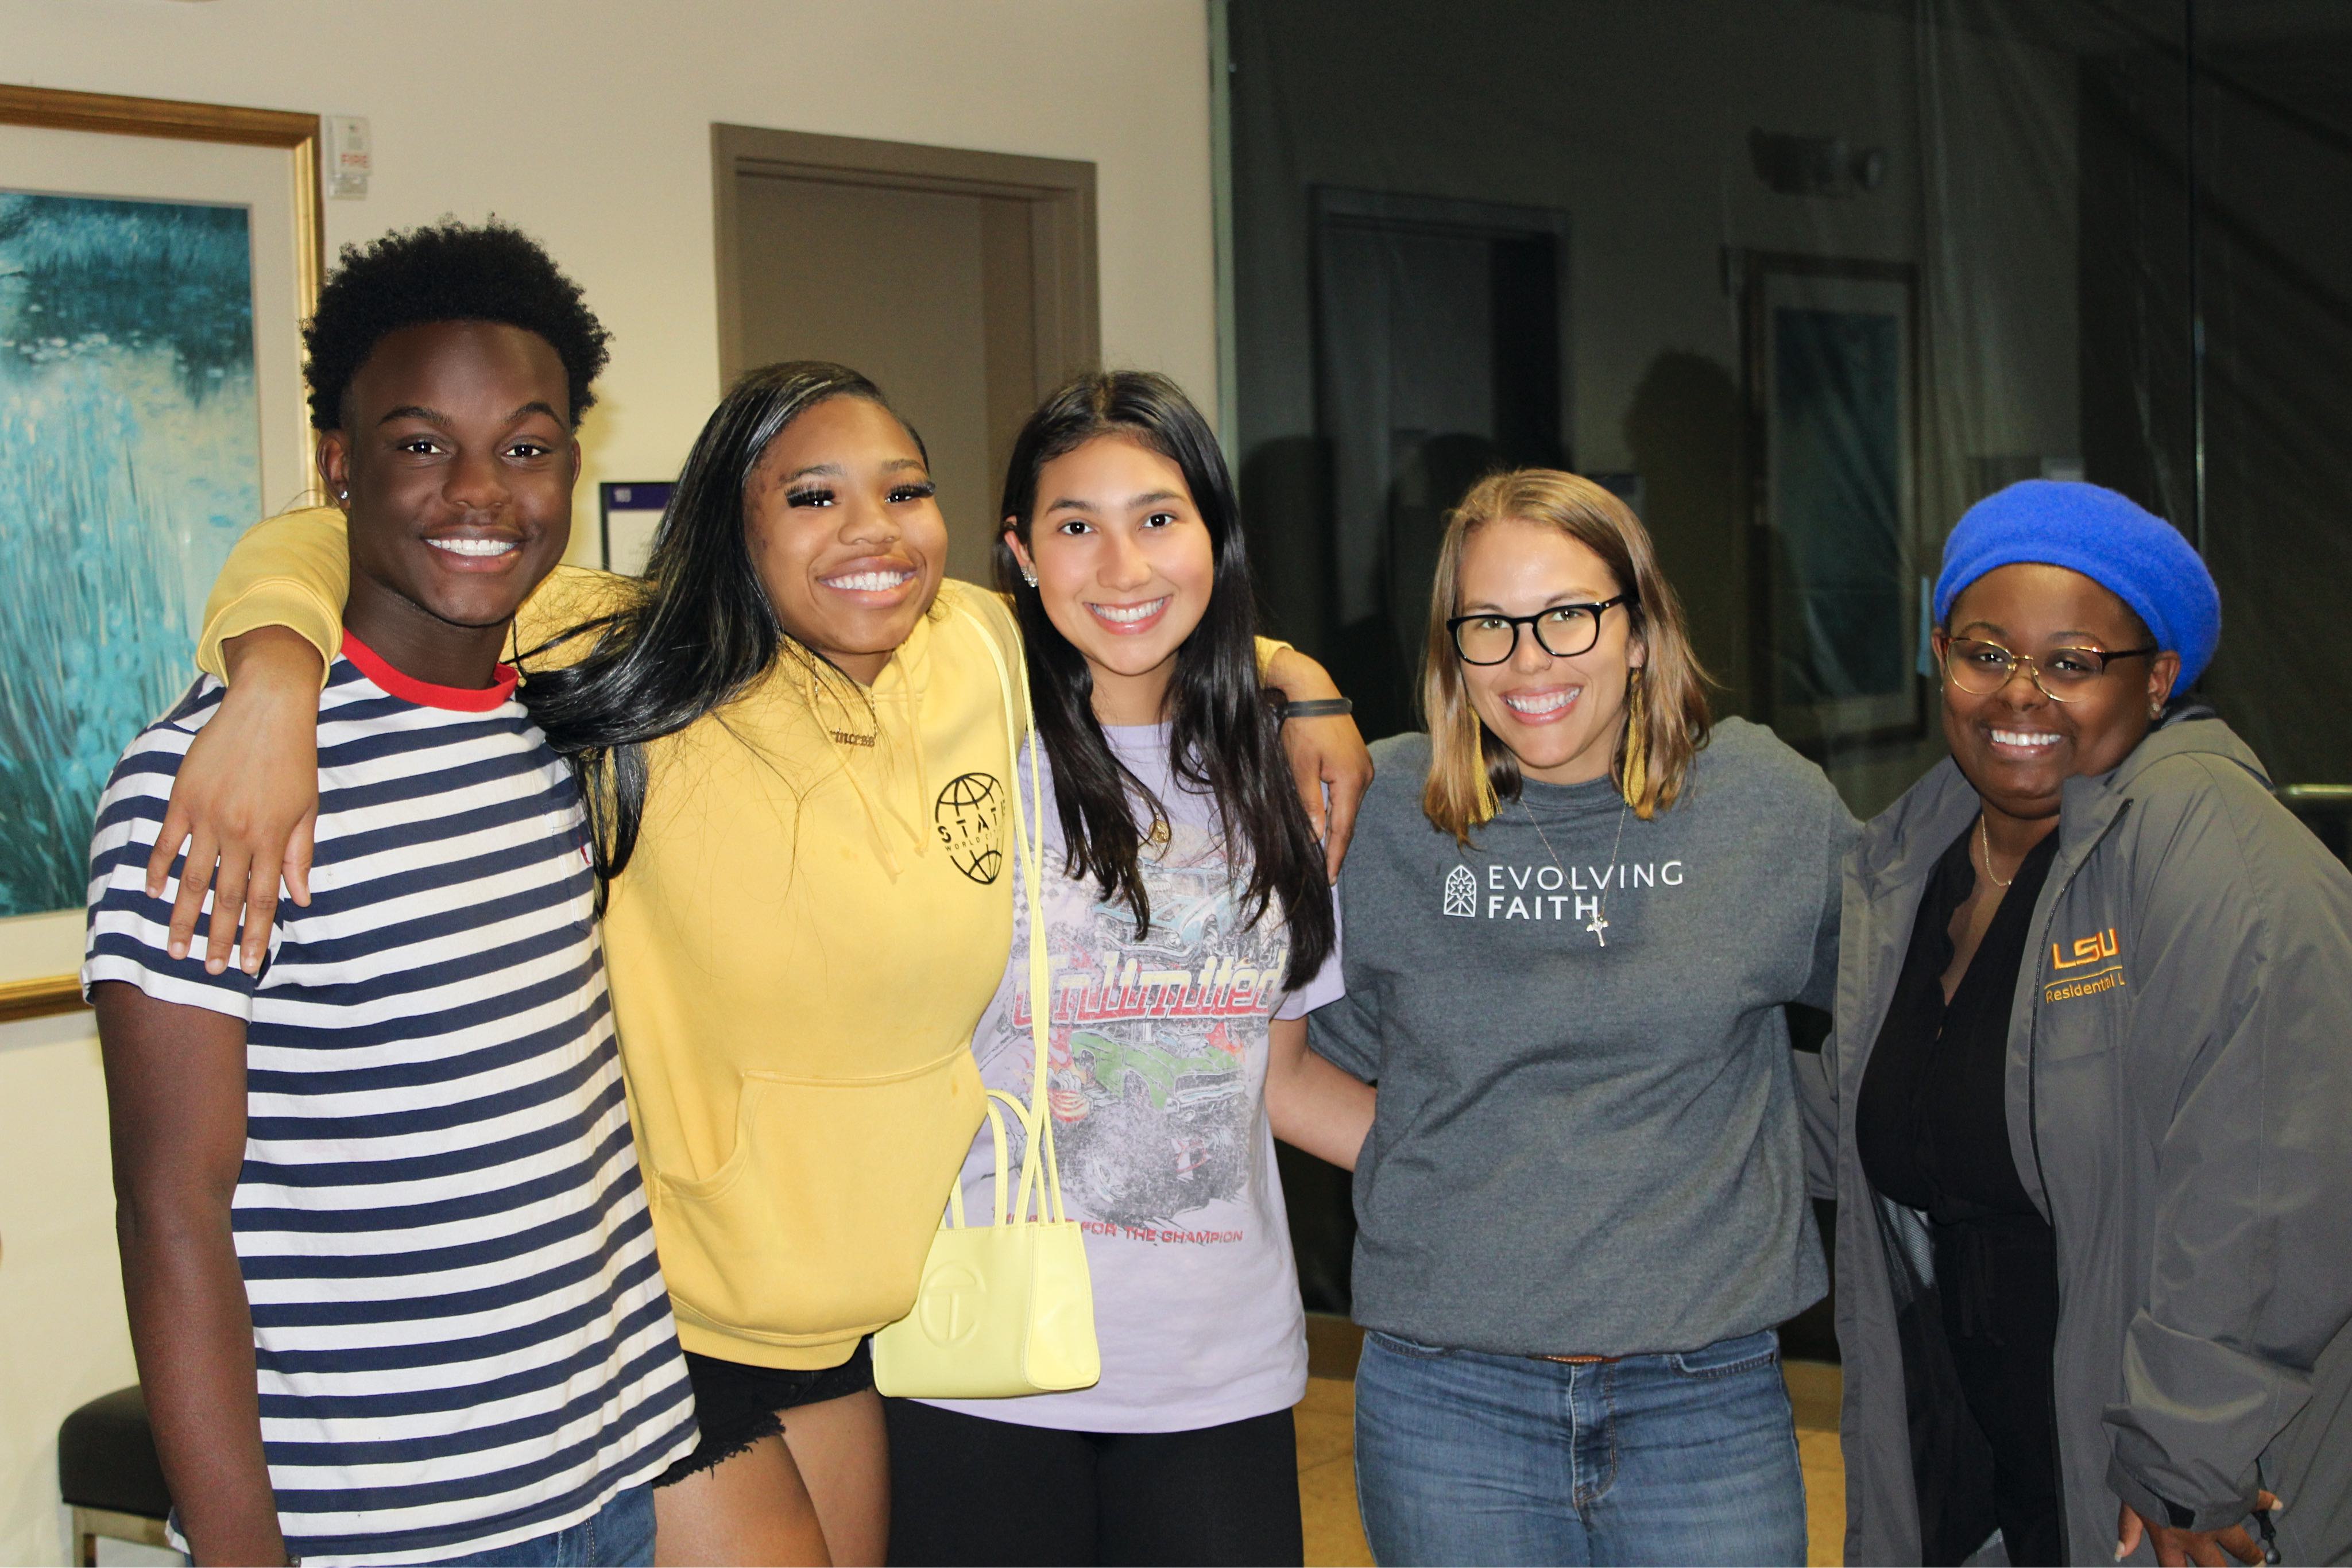 Students and a member of the Residential Life staff posing for a picture.